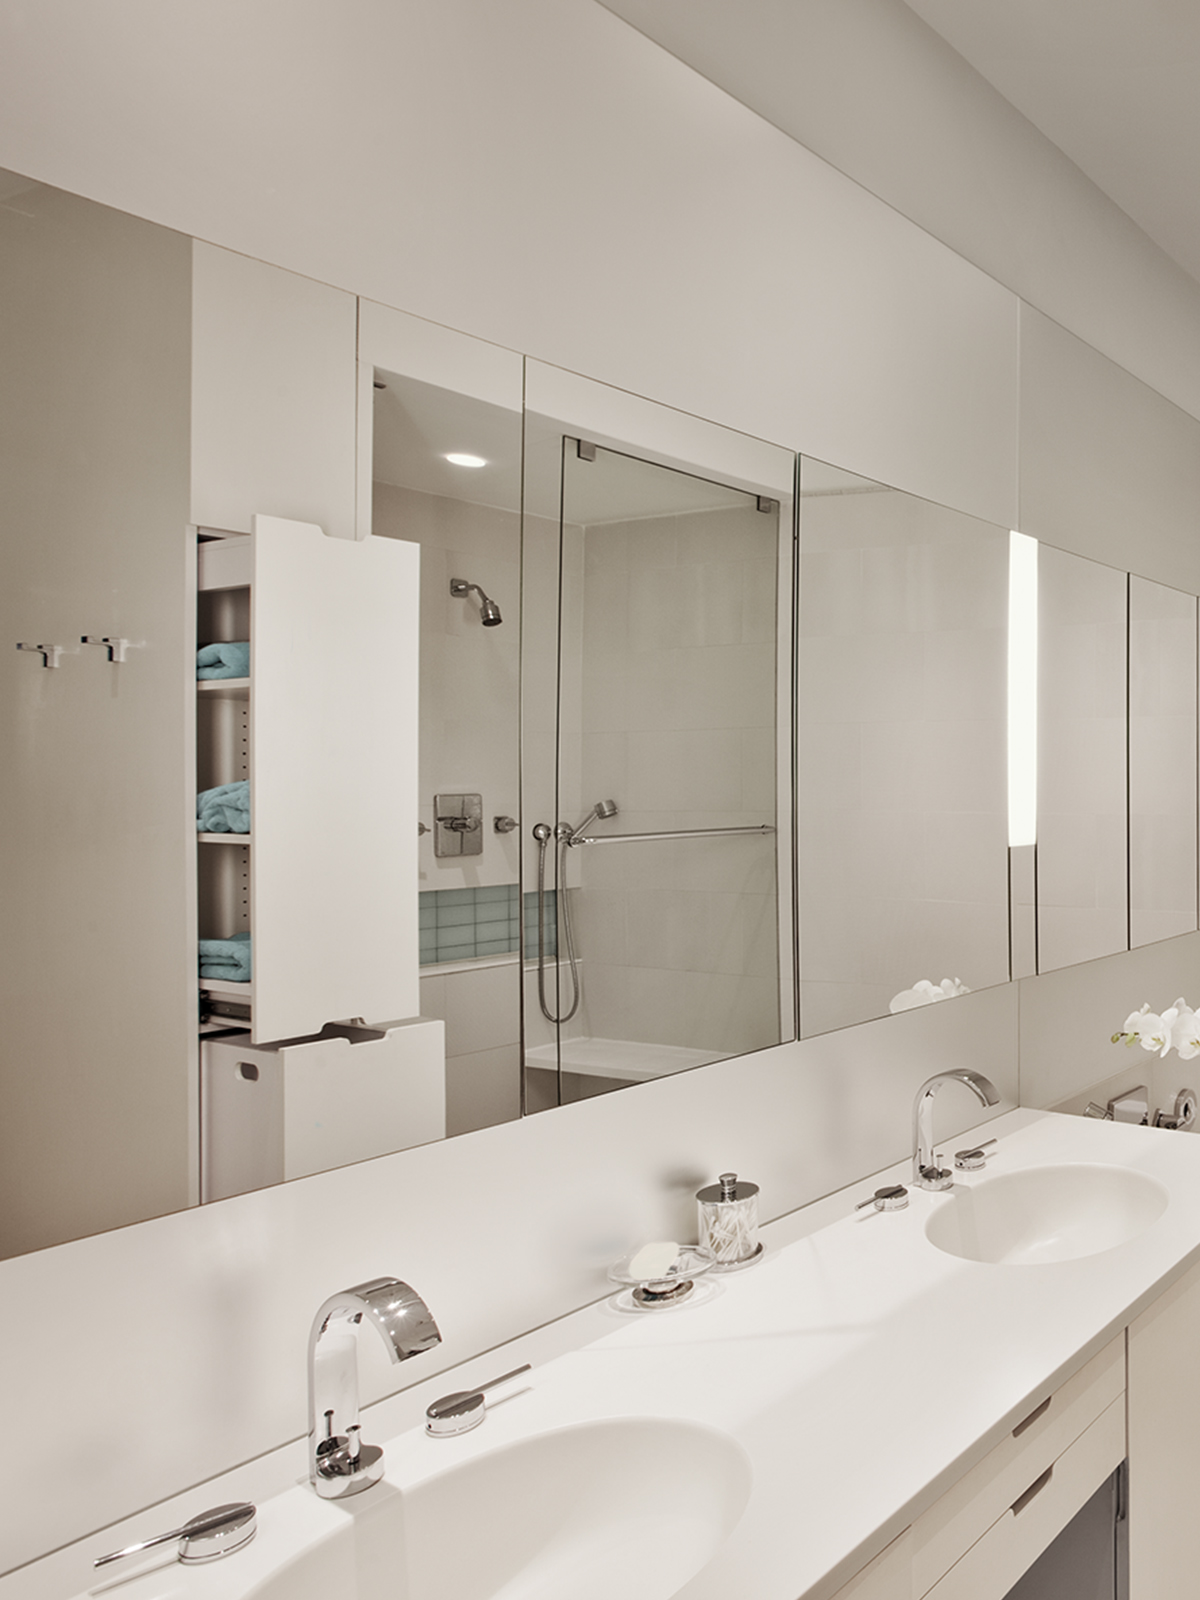 A glowing white bathroom with a double sink on the left, a double shower and pullout storage for towels and toiletries reflected in the mirror above the sinks, a tube in the center on the back wall of the bathroom